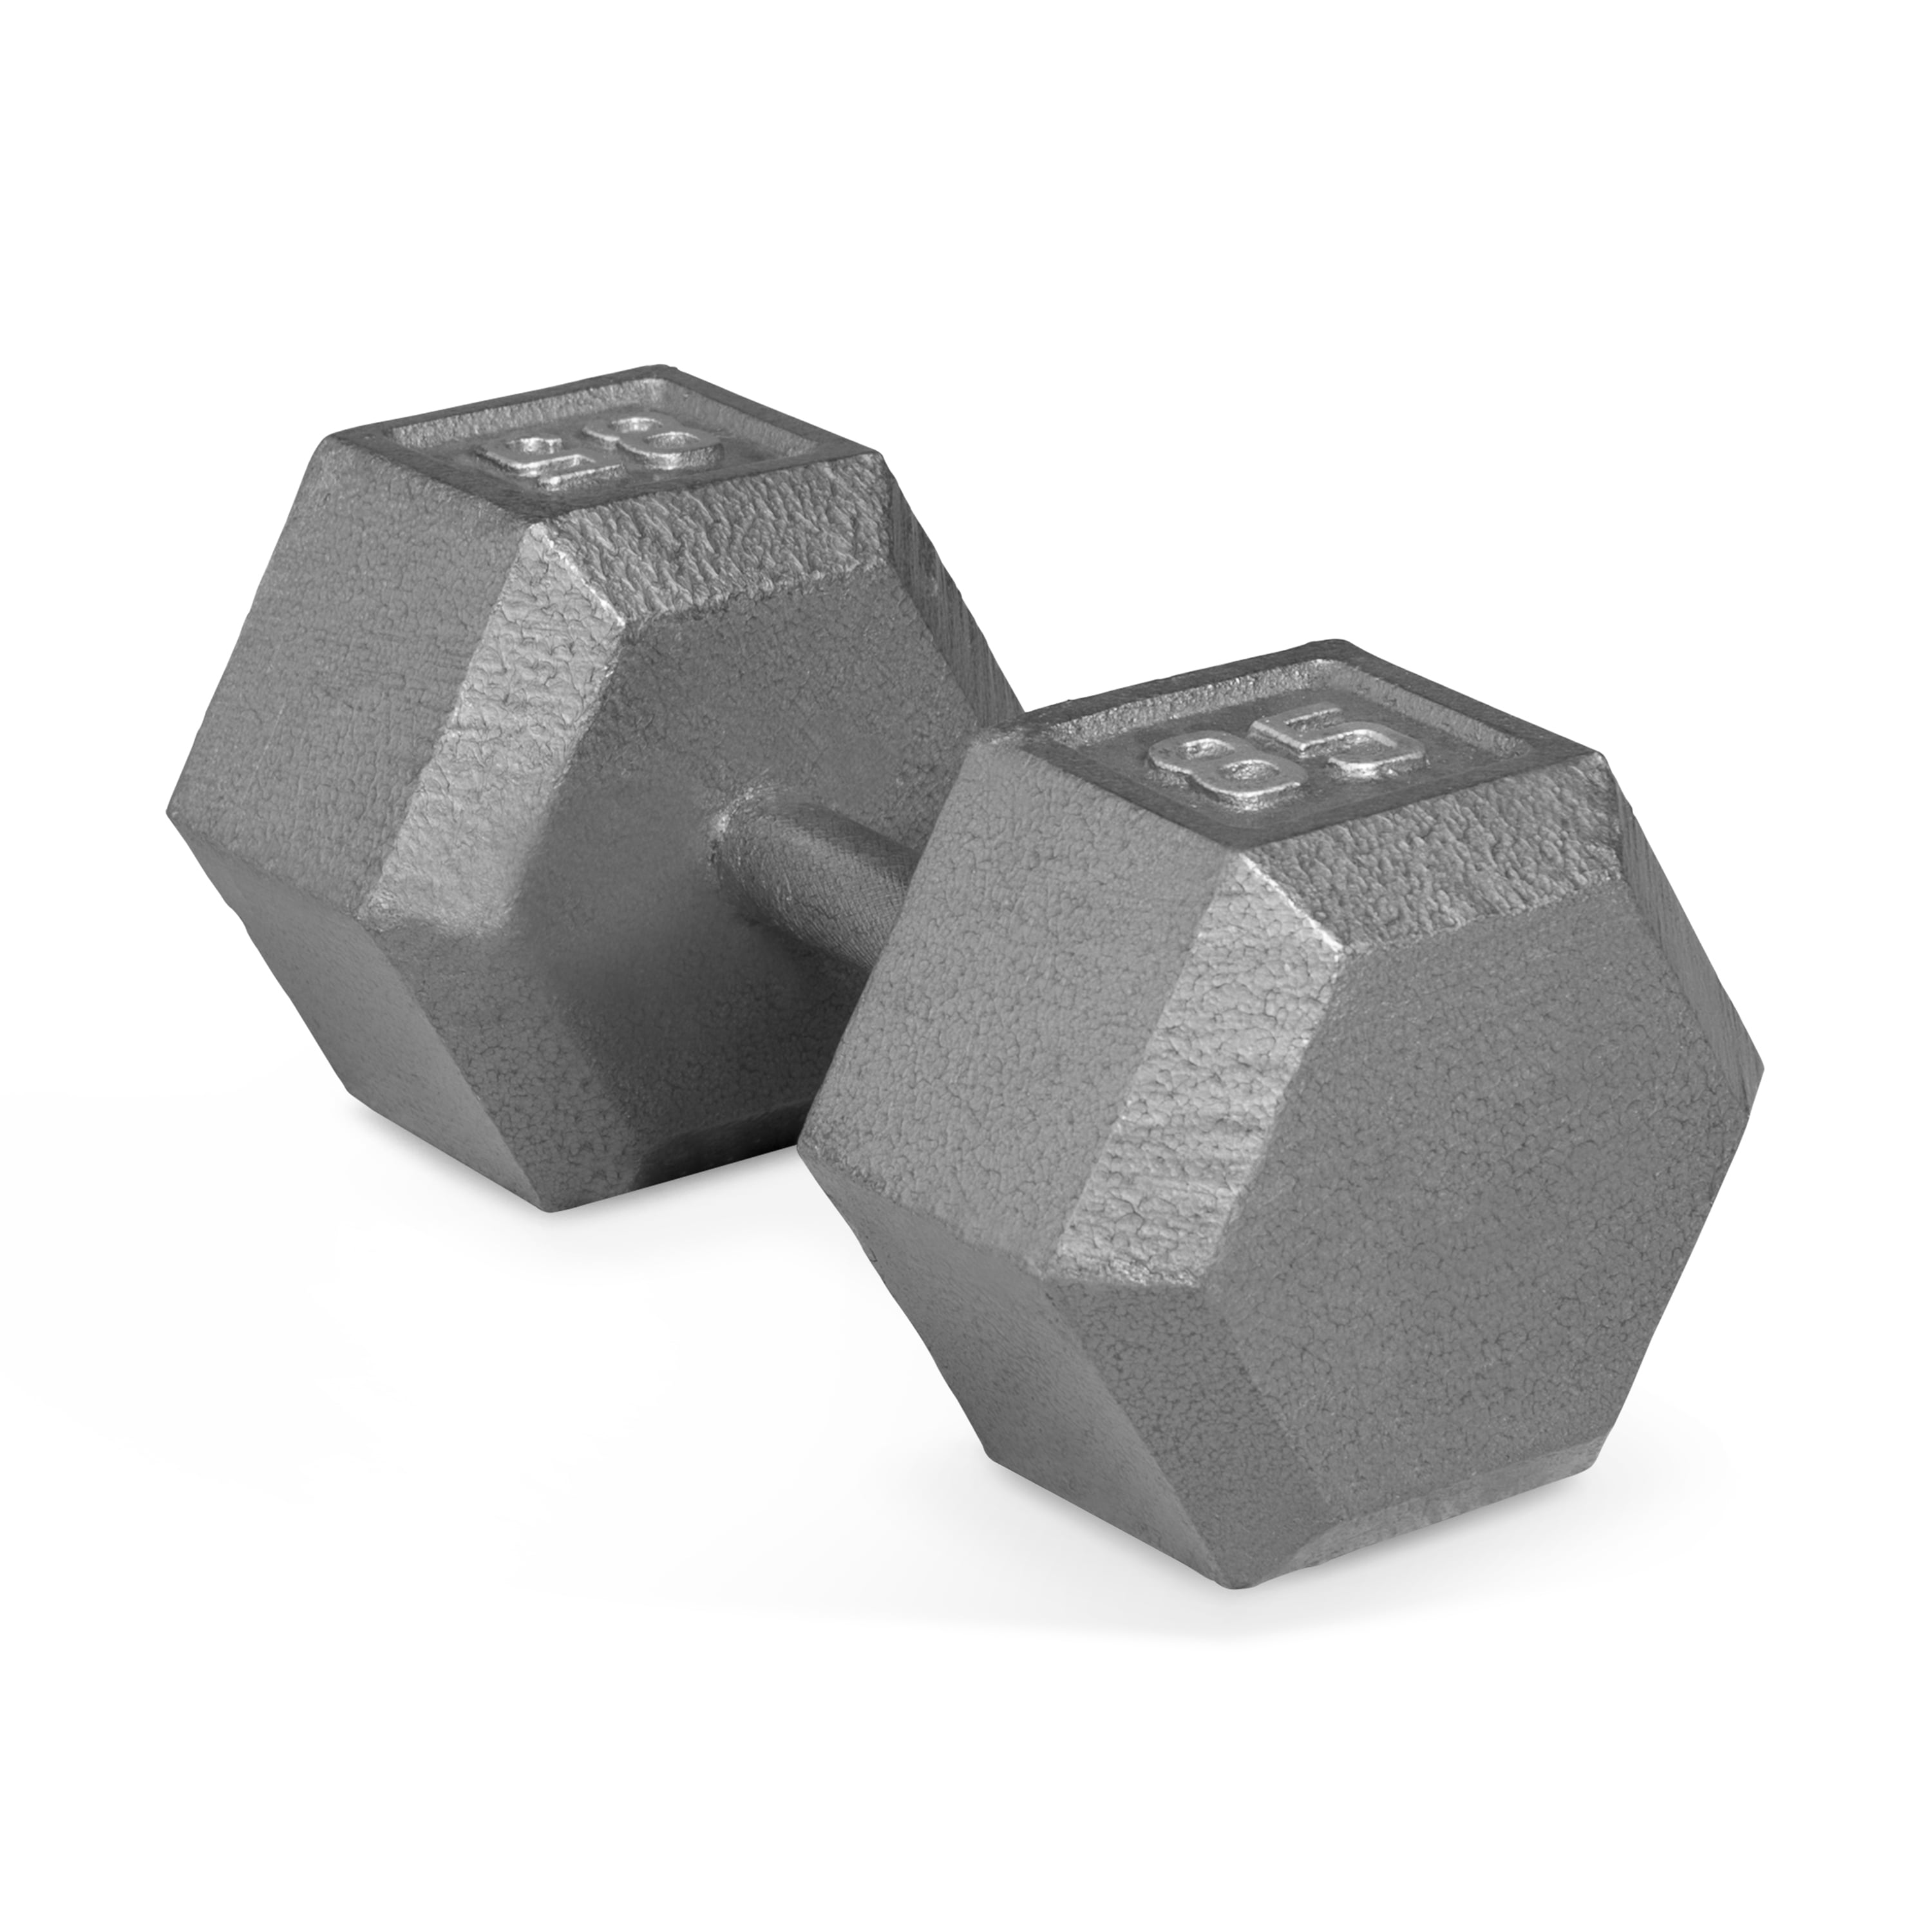 DROP SHIP SDPP-020 - CAP Barbell PVC Coated Hex Dumbbell Weights Black 10 pound Pair Inc